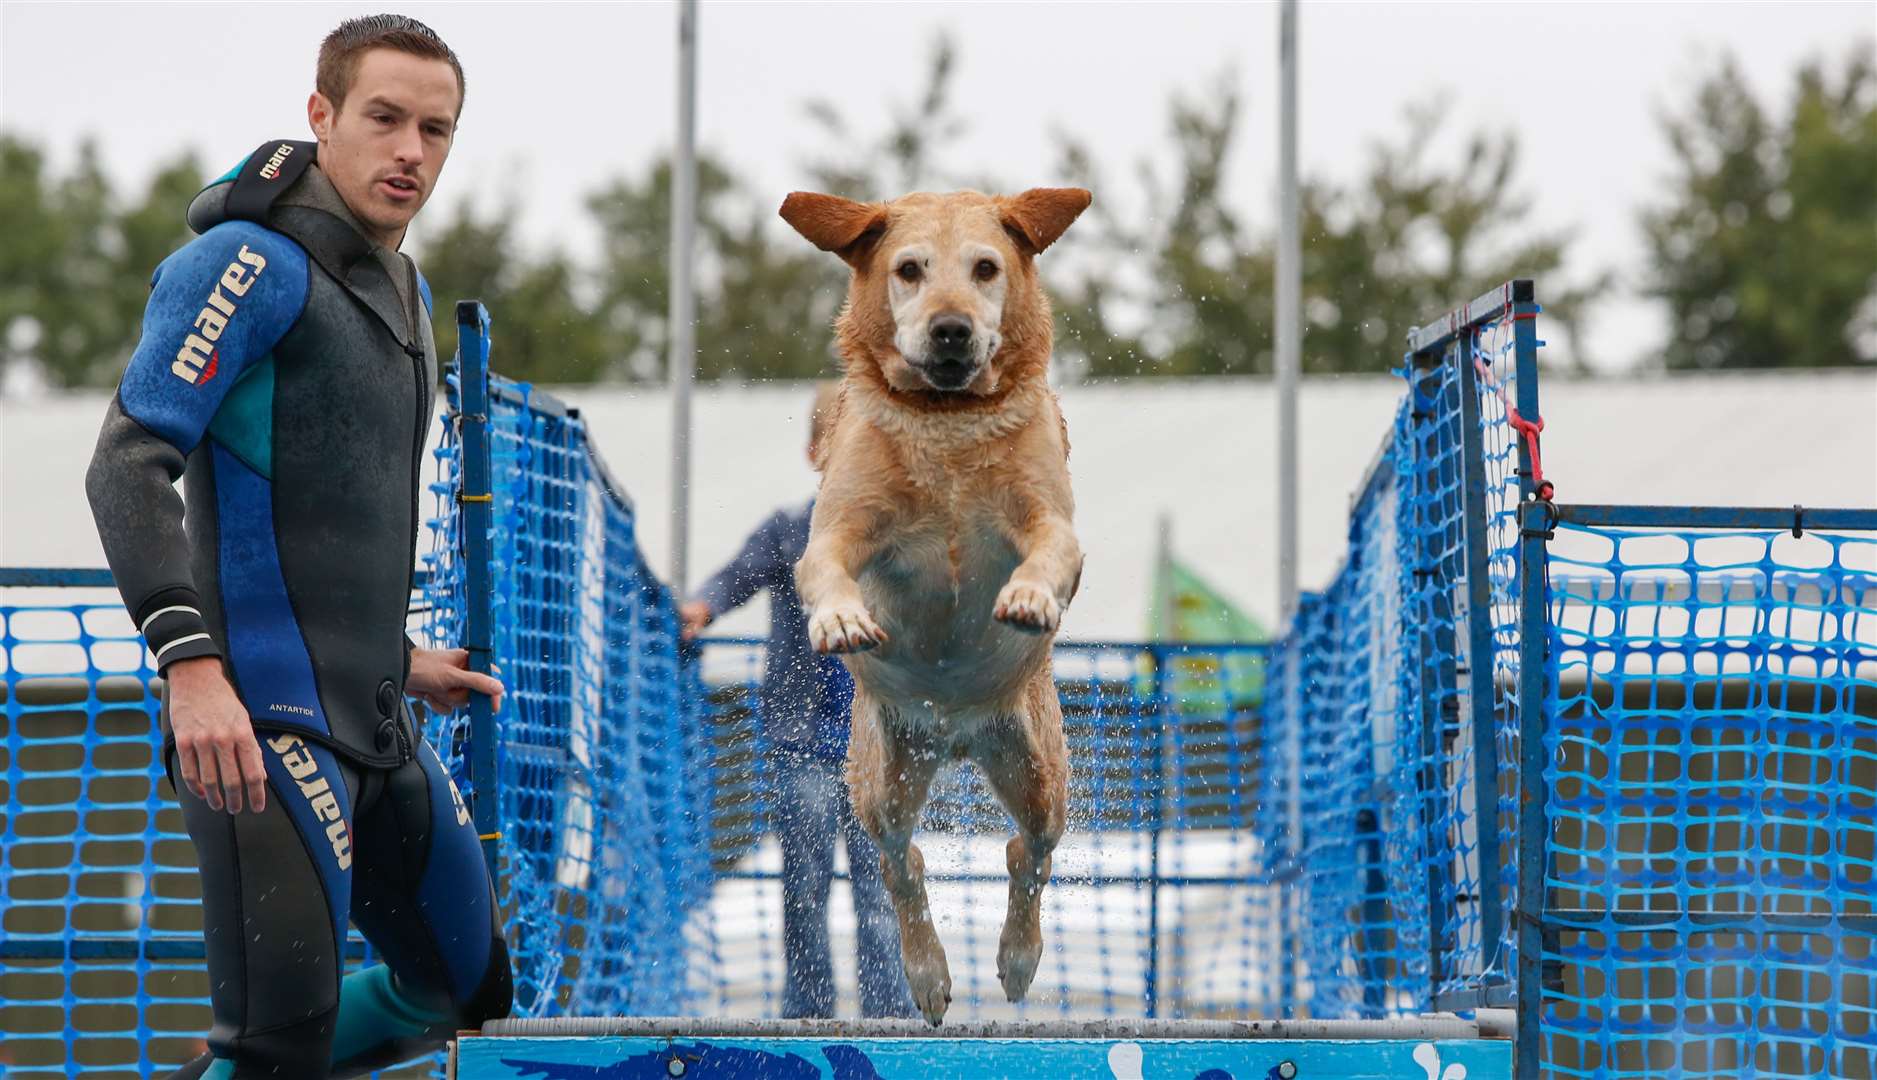 Splash out and head for Paws in the Park this weekend